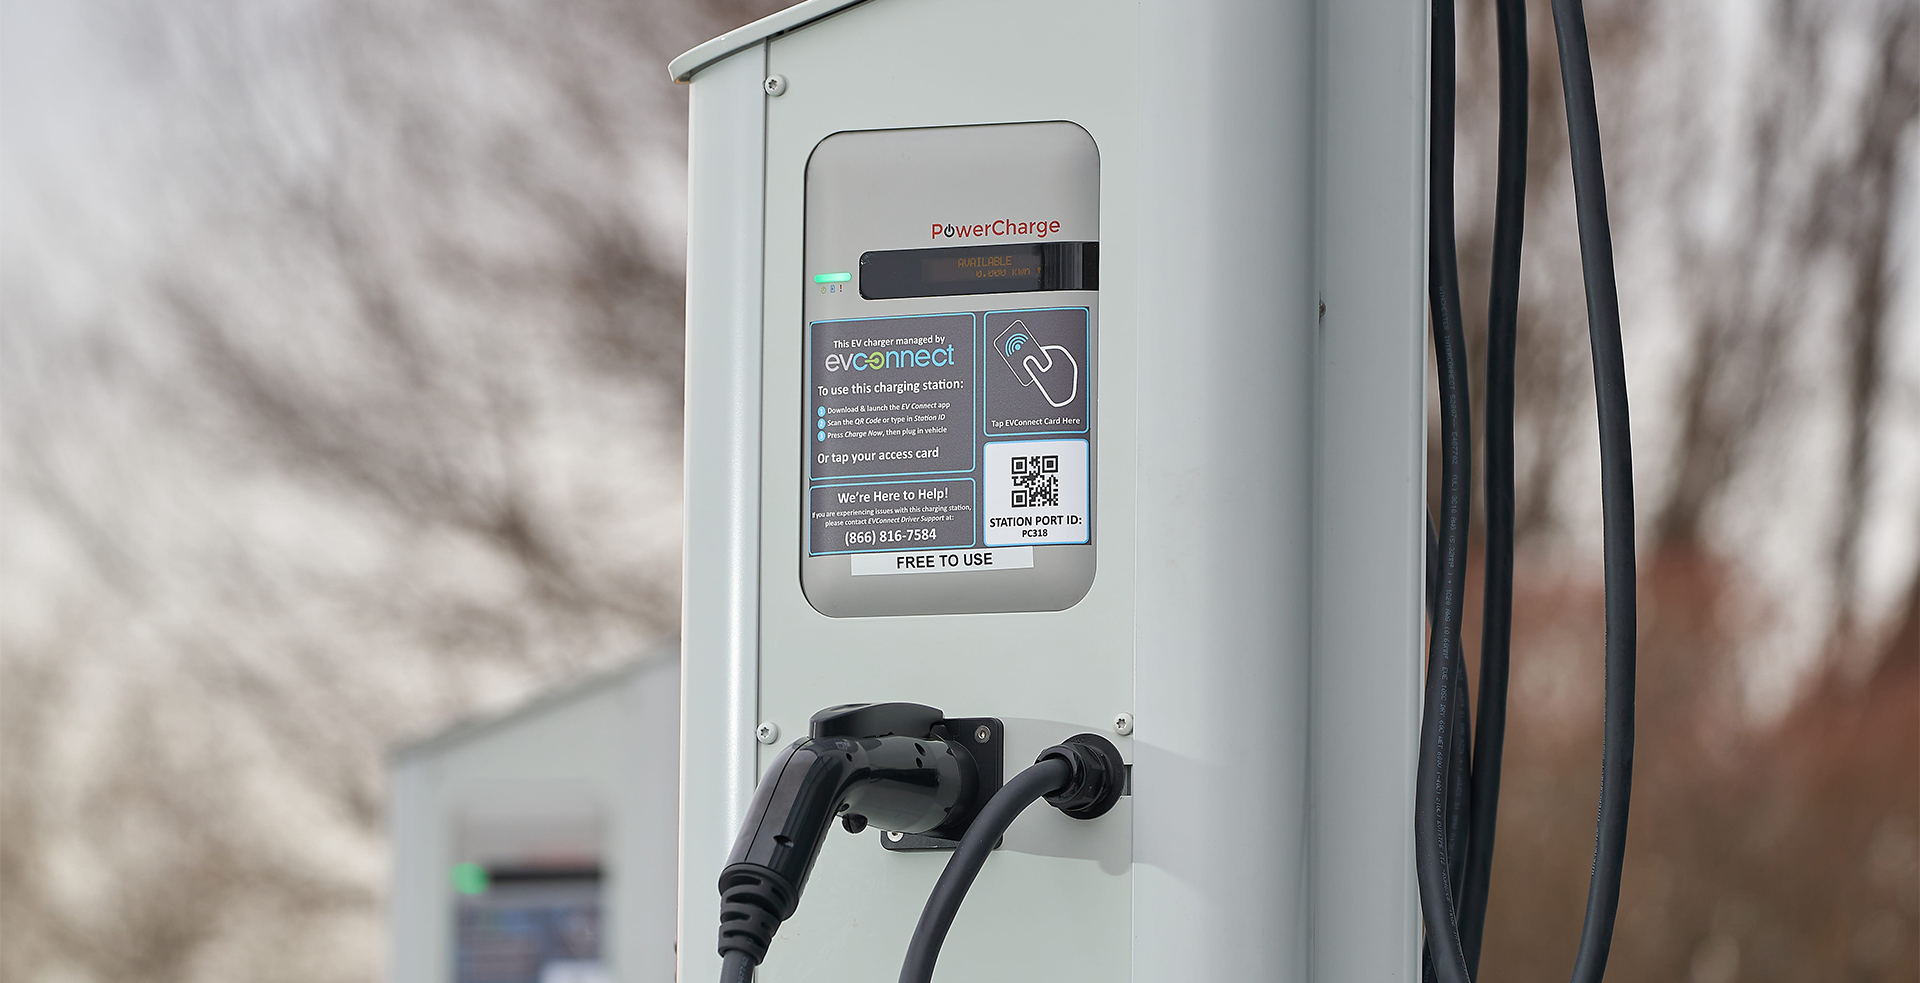 Electric vehicle charging stations